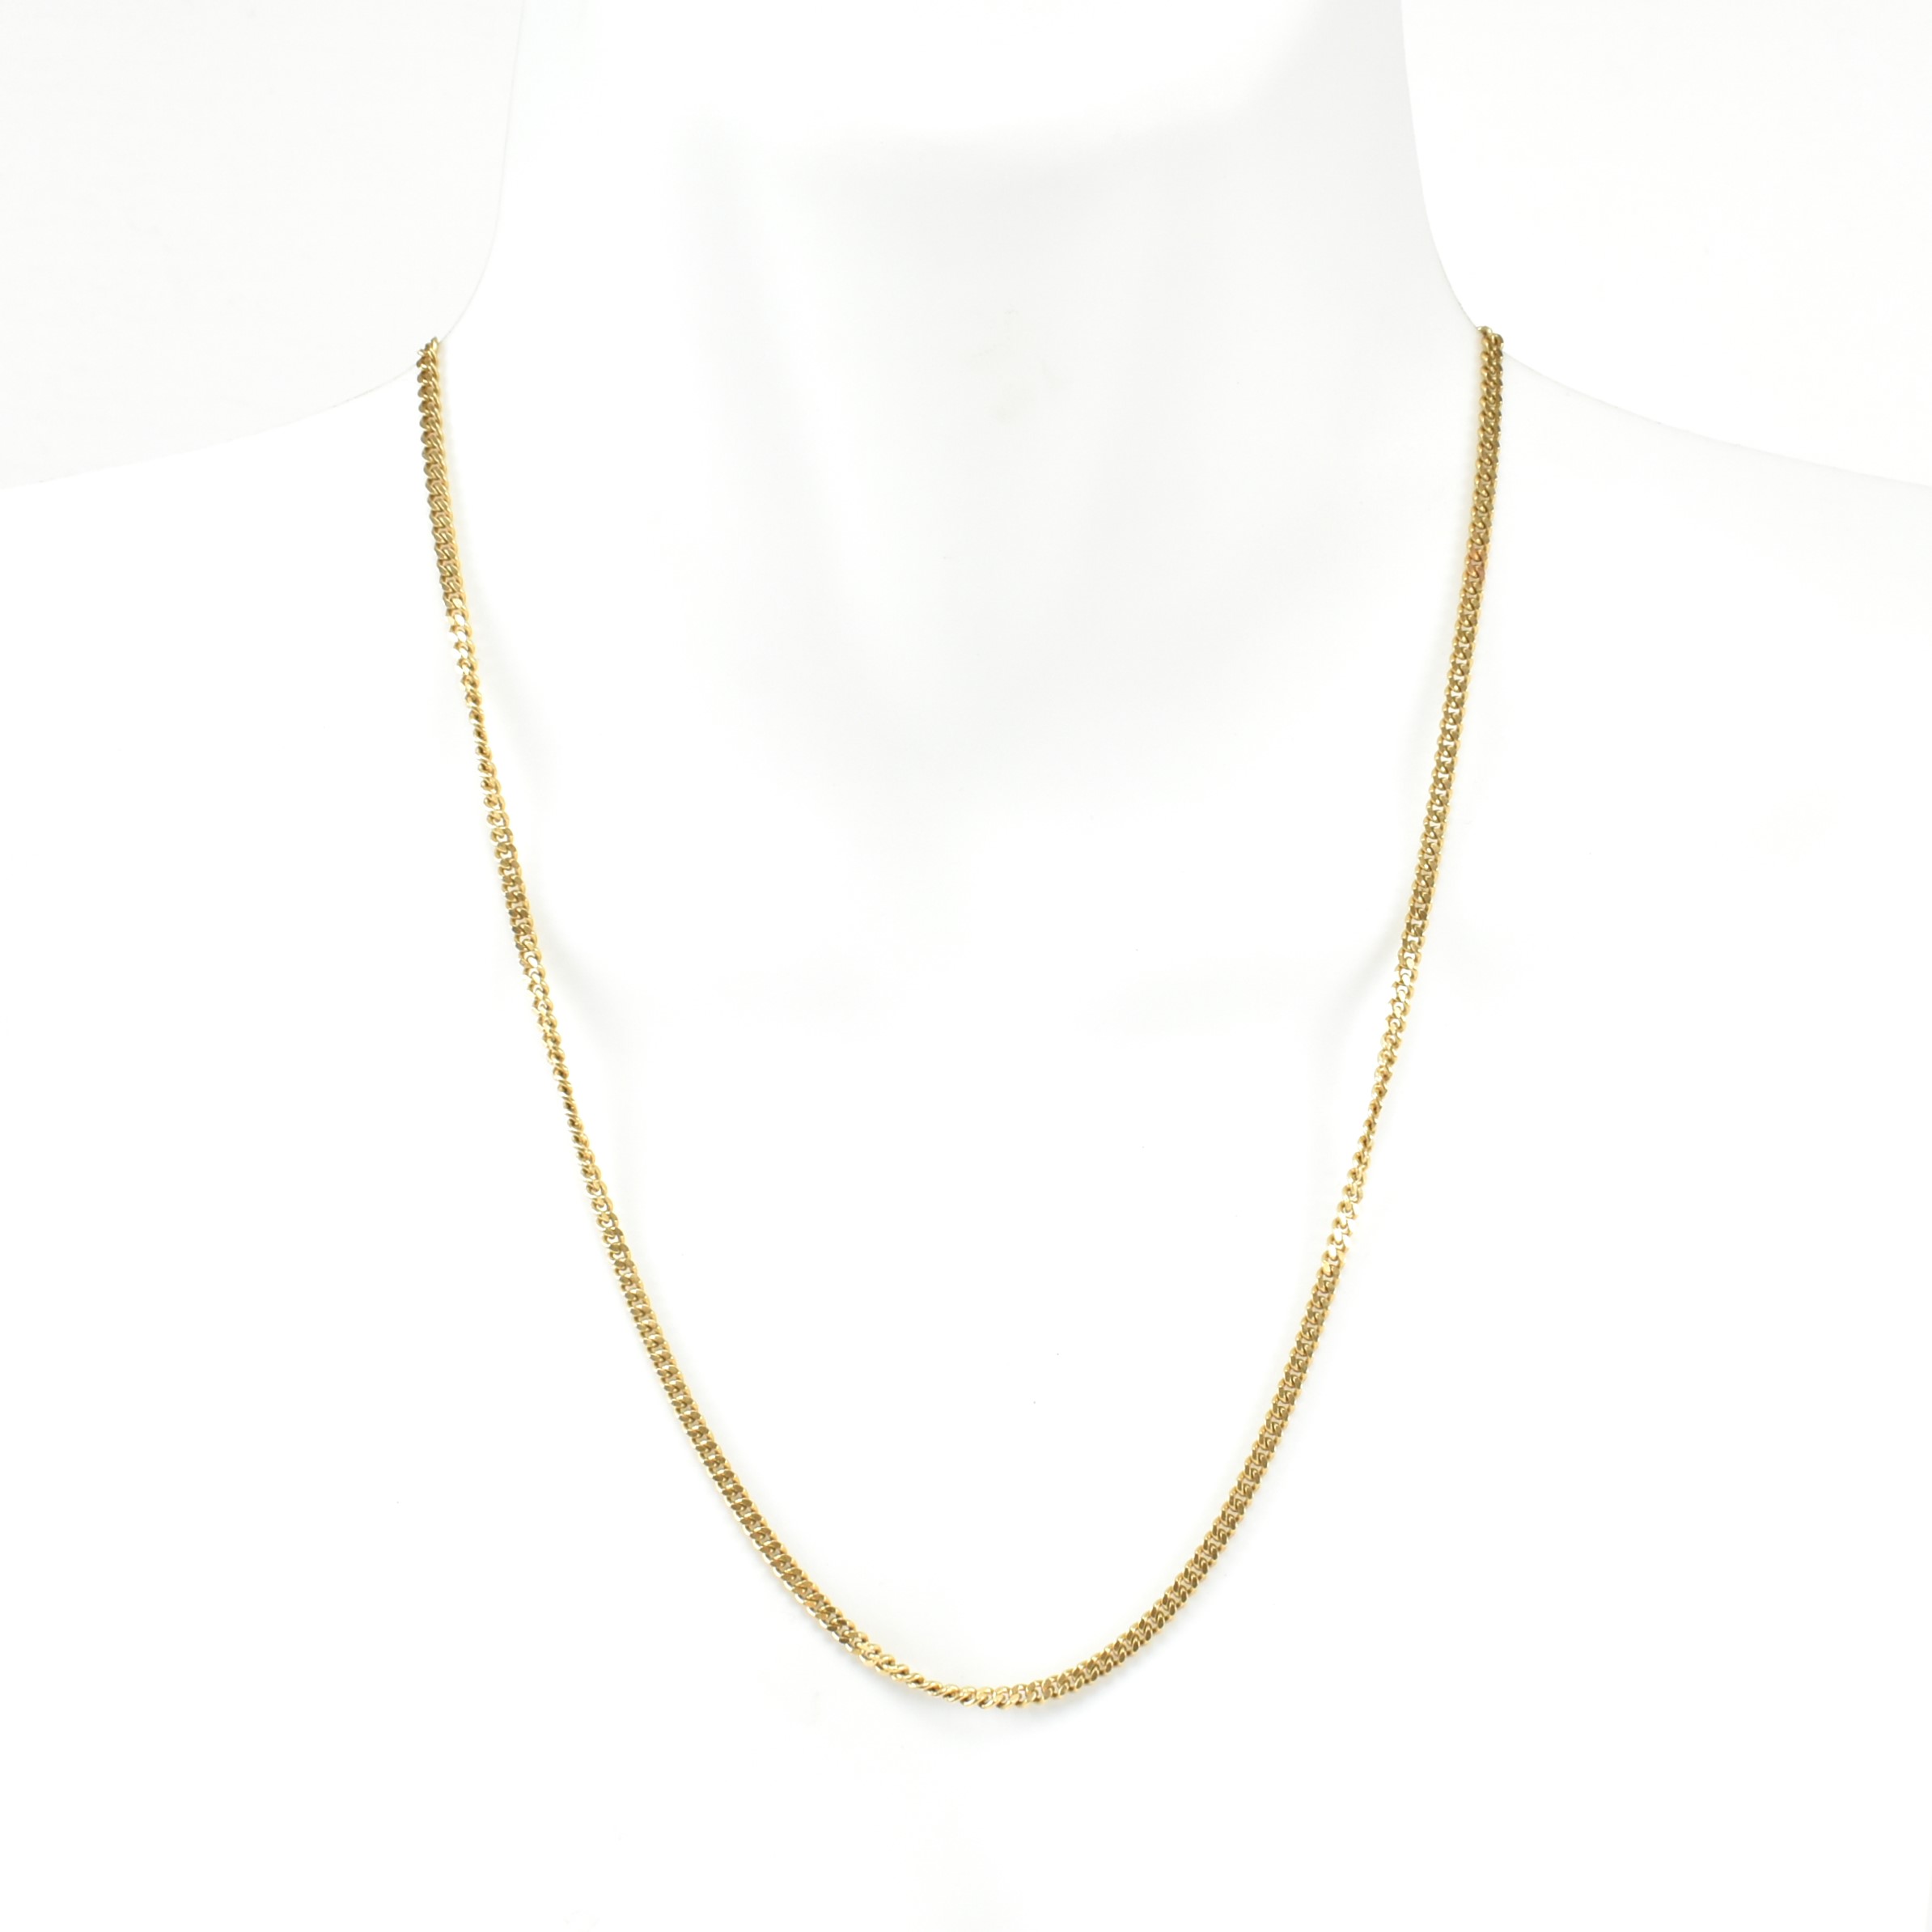 ITALIAN 18CT GOLD CURB LINK CHAIN NECKLACE - Image 4 of 4